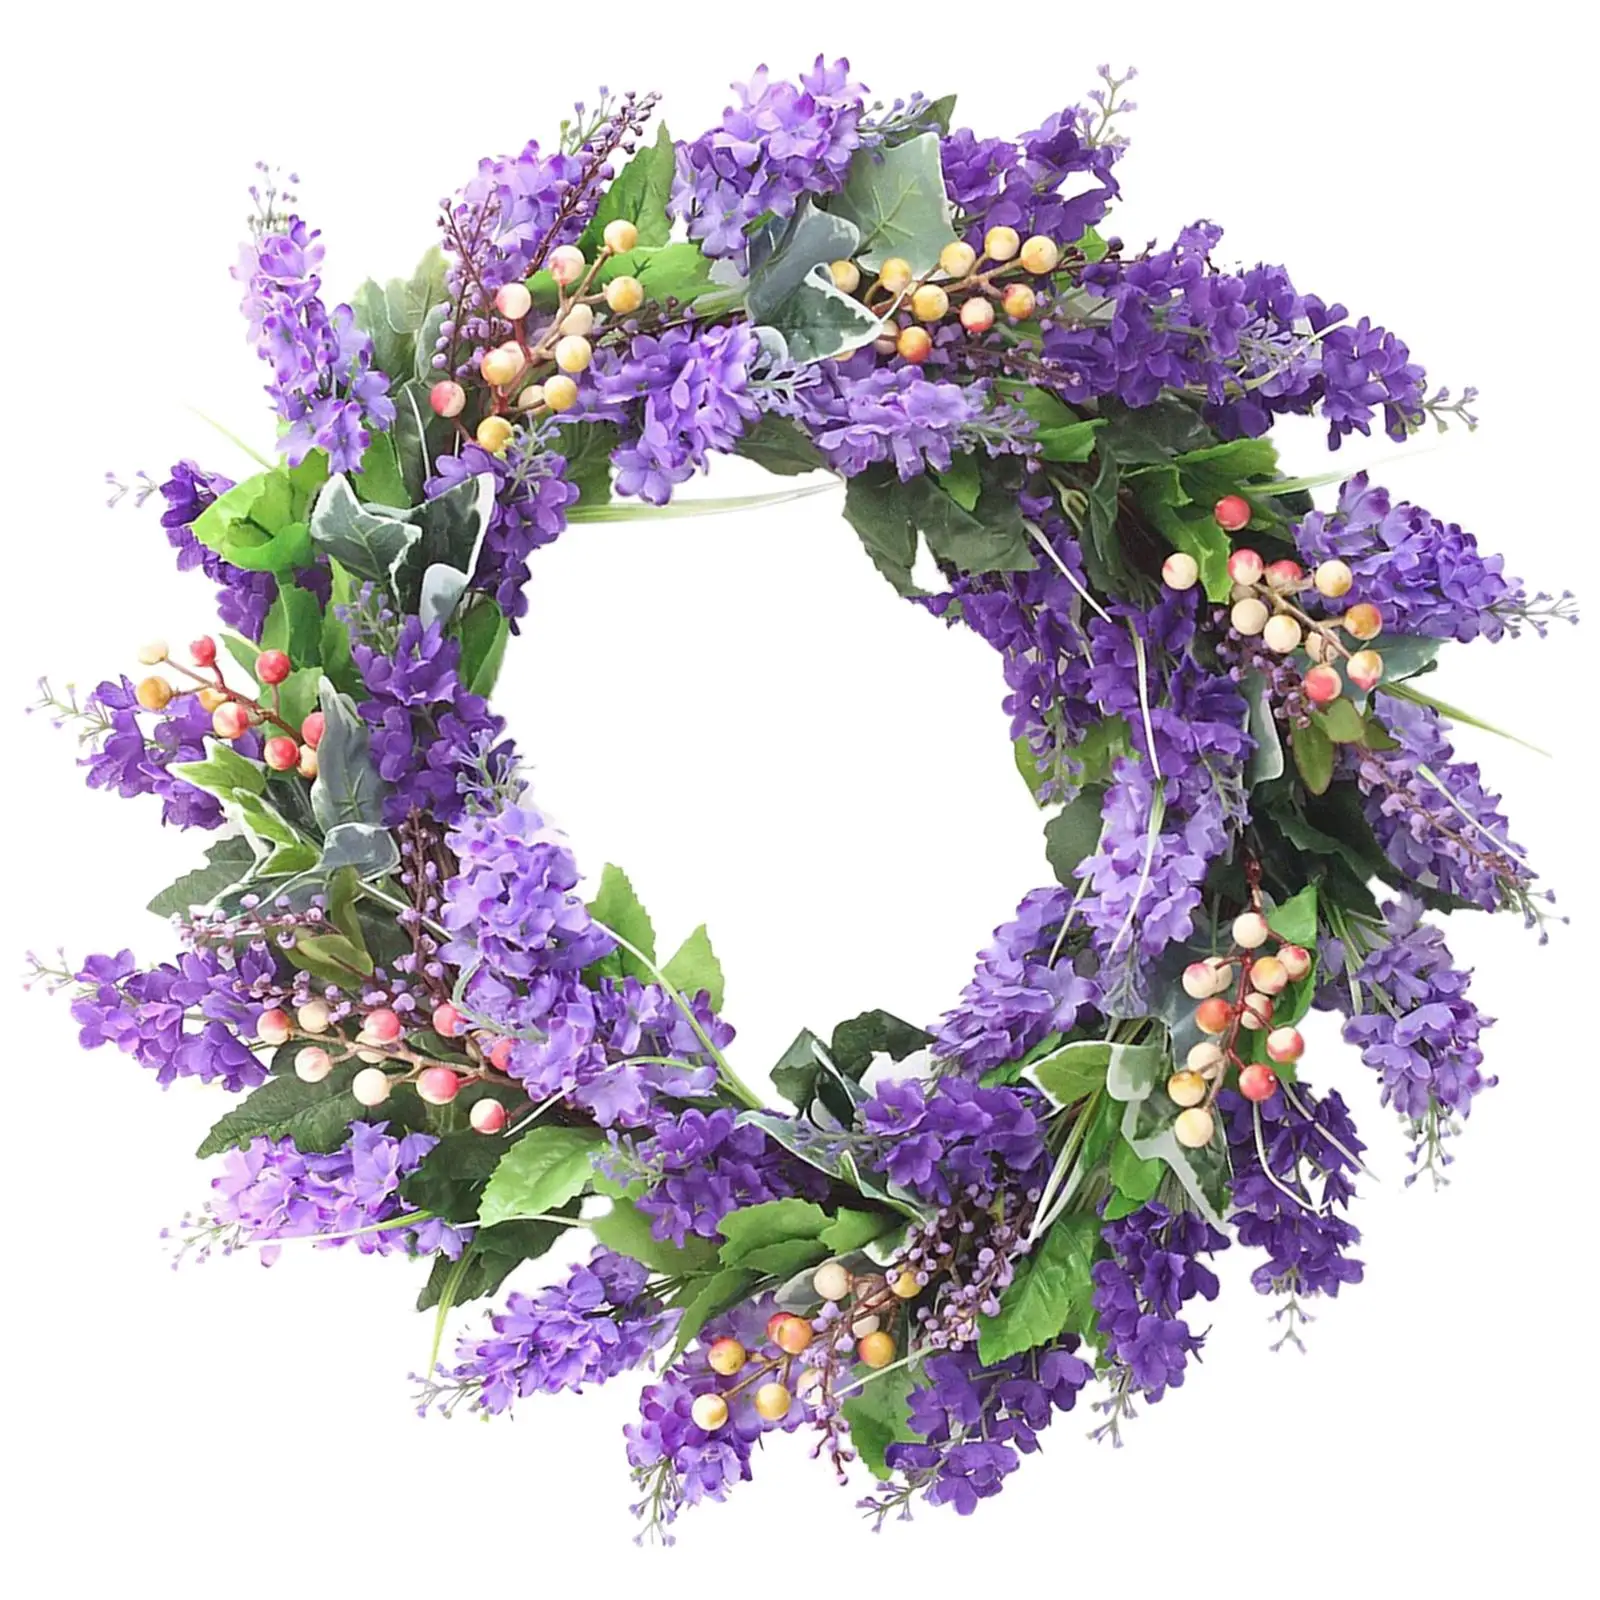 Lavender Wreath Artificial Flower Wreaths for Front Door Garden Wall Hanging Ornament Wedding Party Home Decoration